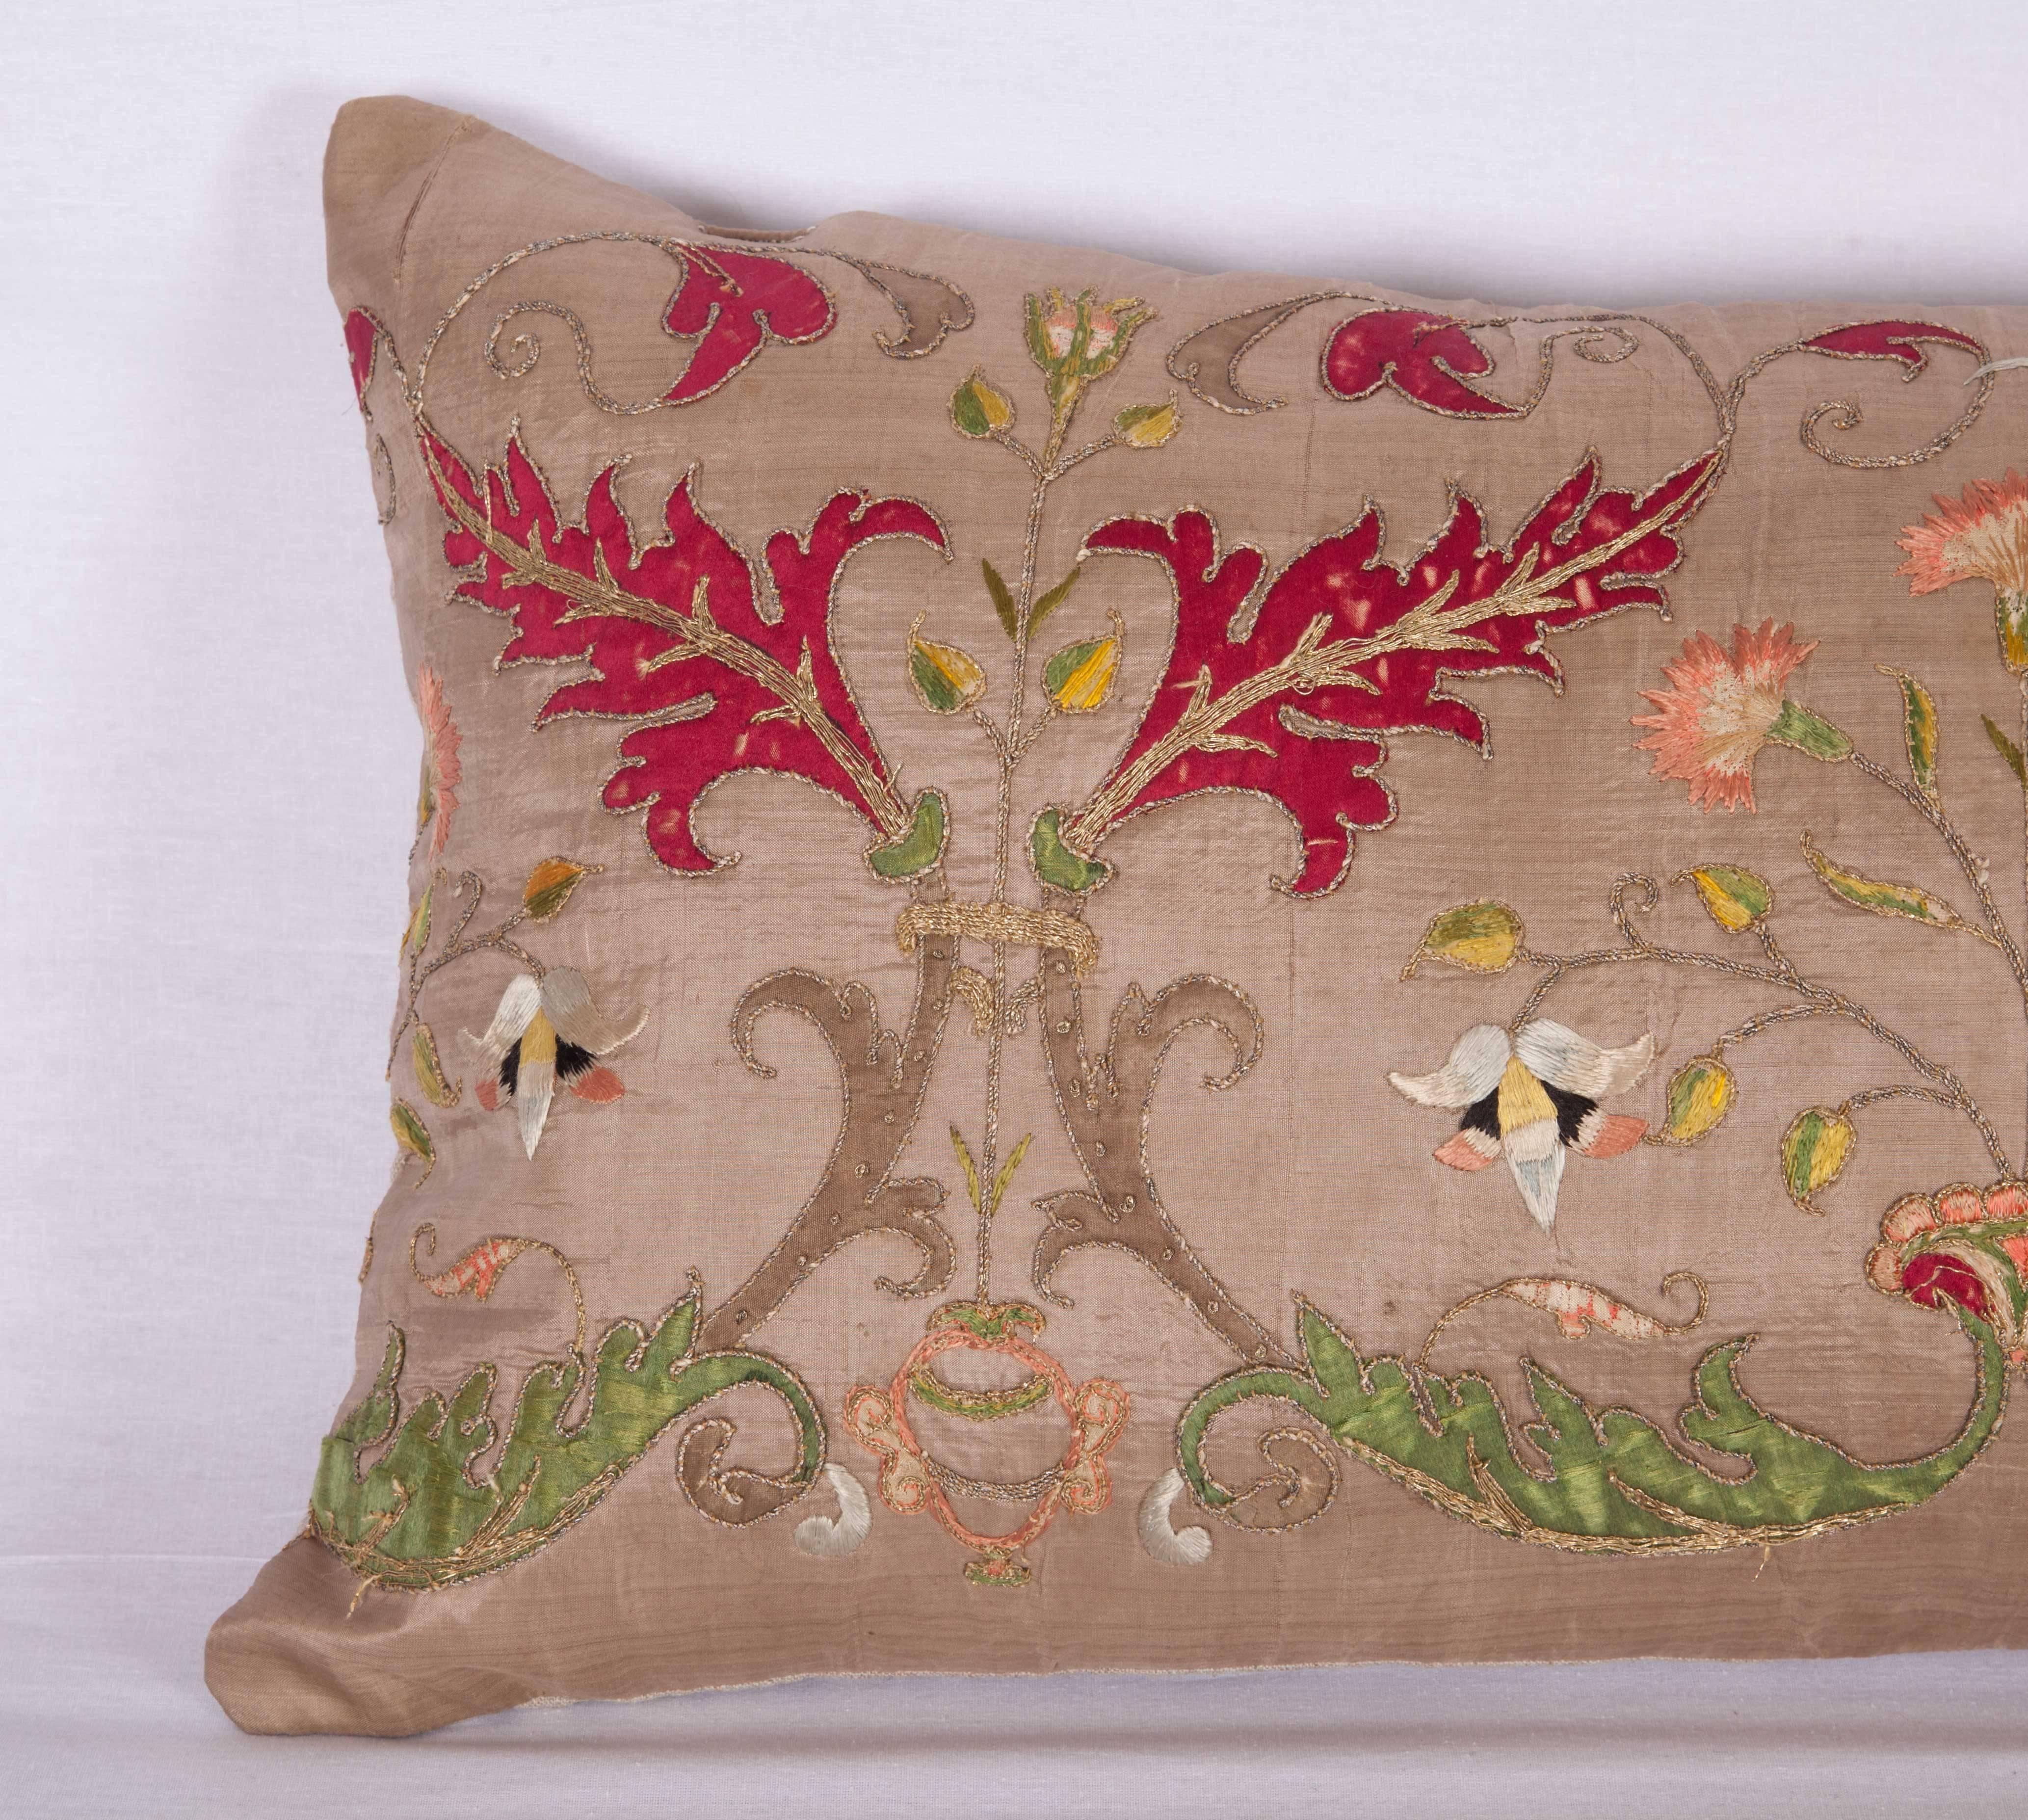 The pillow case is made out of a 17th or 18th century Italian silk applique and embroidered panel. It does not come with an insert but it comes with a bag made to the size and out of cotton to accommodate the filling. The backing is made of linen.